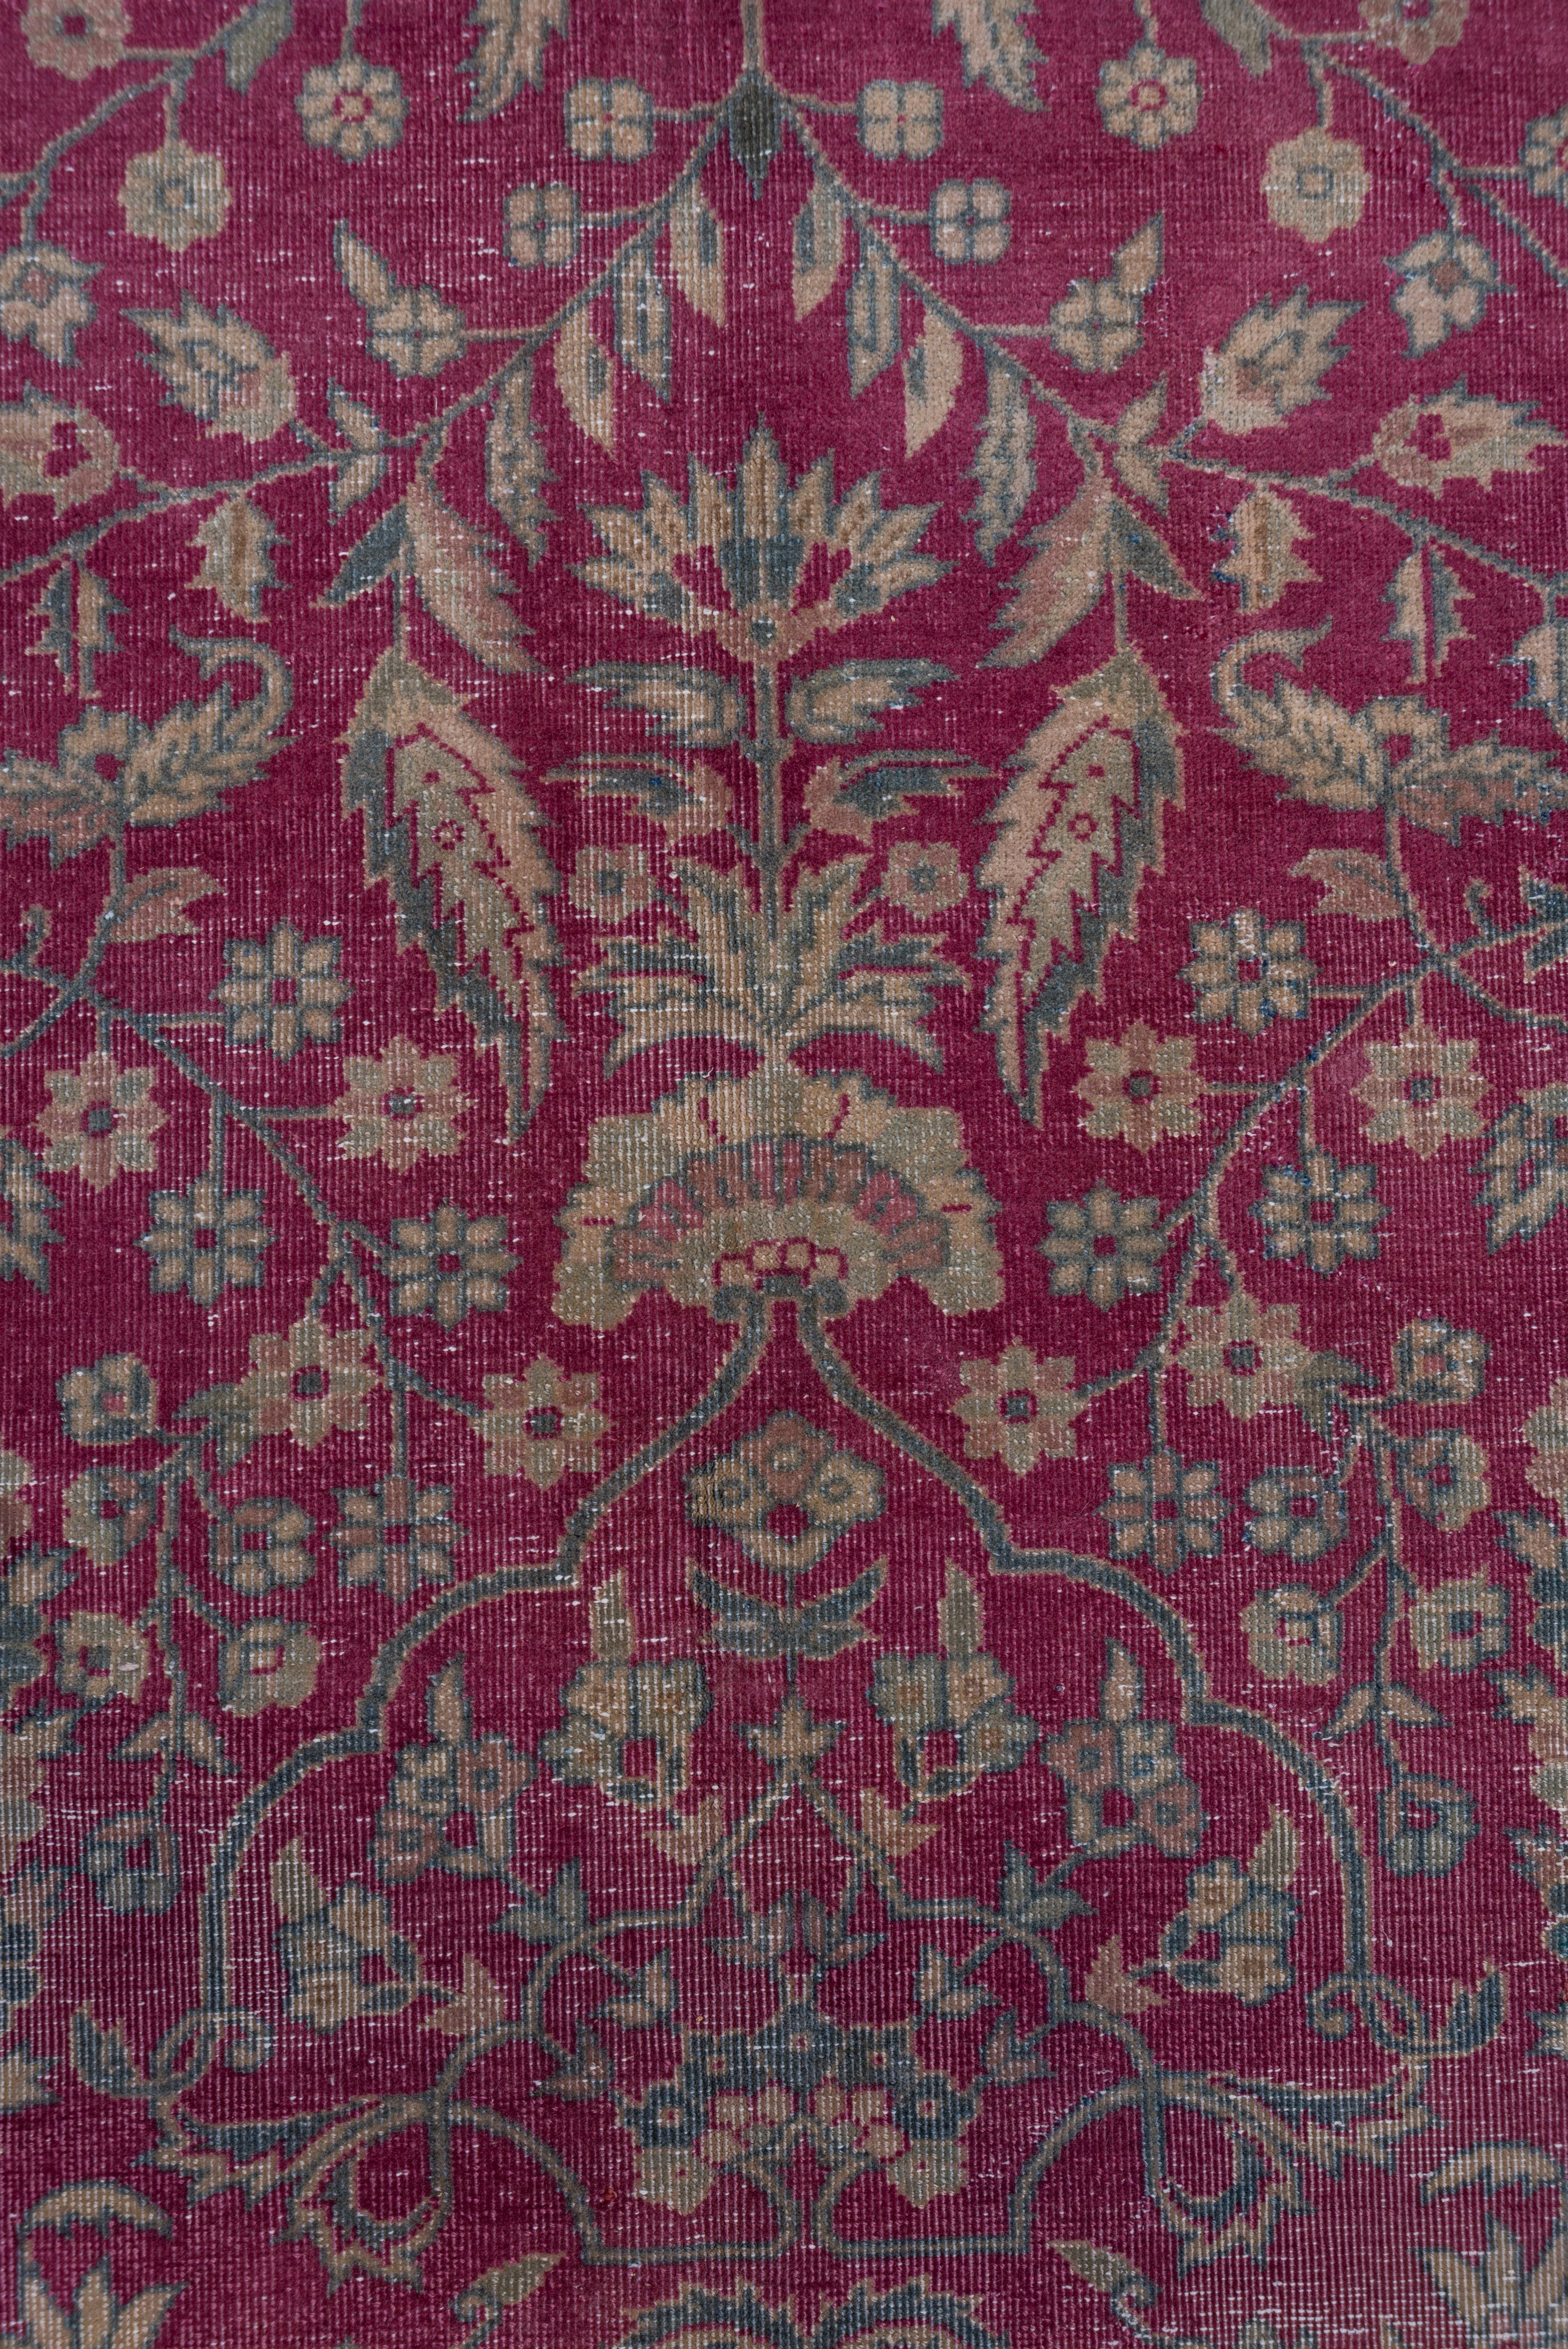 Antique Turkish Sivas Rug, Raspberry Red Field, Teal Borders, Circa 1930s For Sale 3